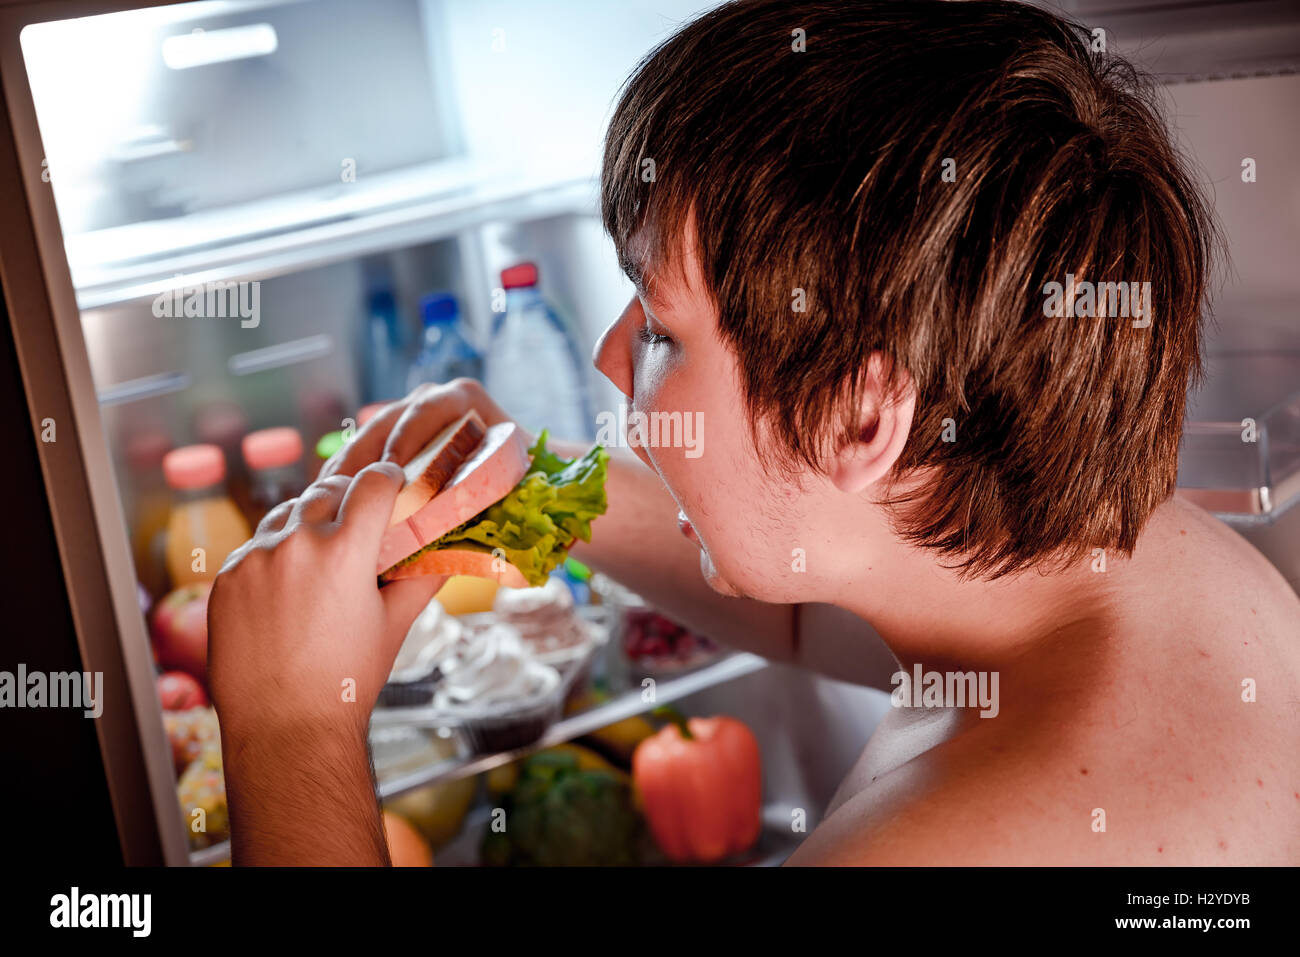 Hungry fat man holding a big sandwich in his hands and standing next to the open fridge. Unhealthy food. Stock Photo